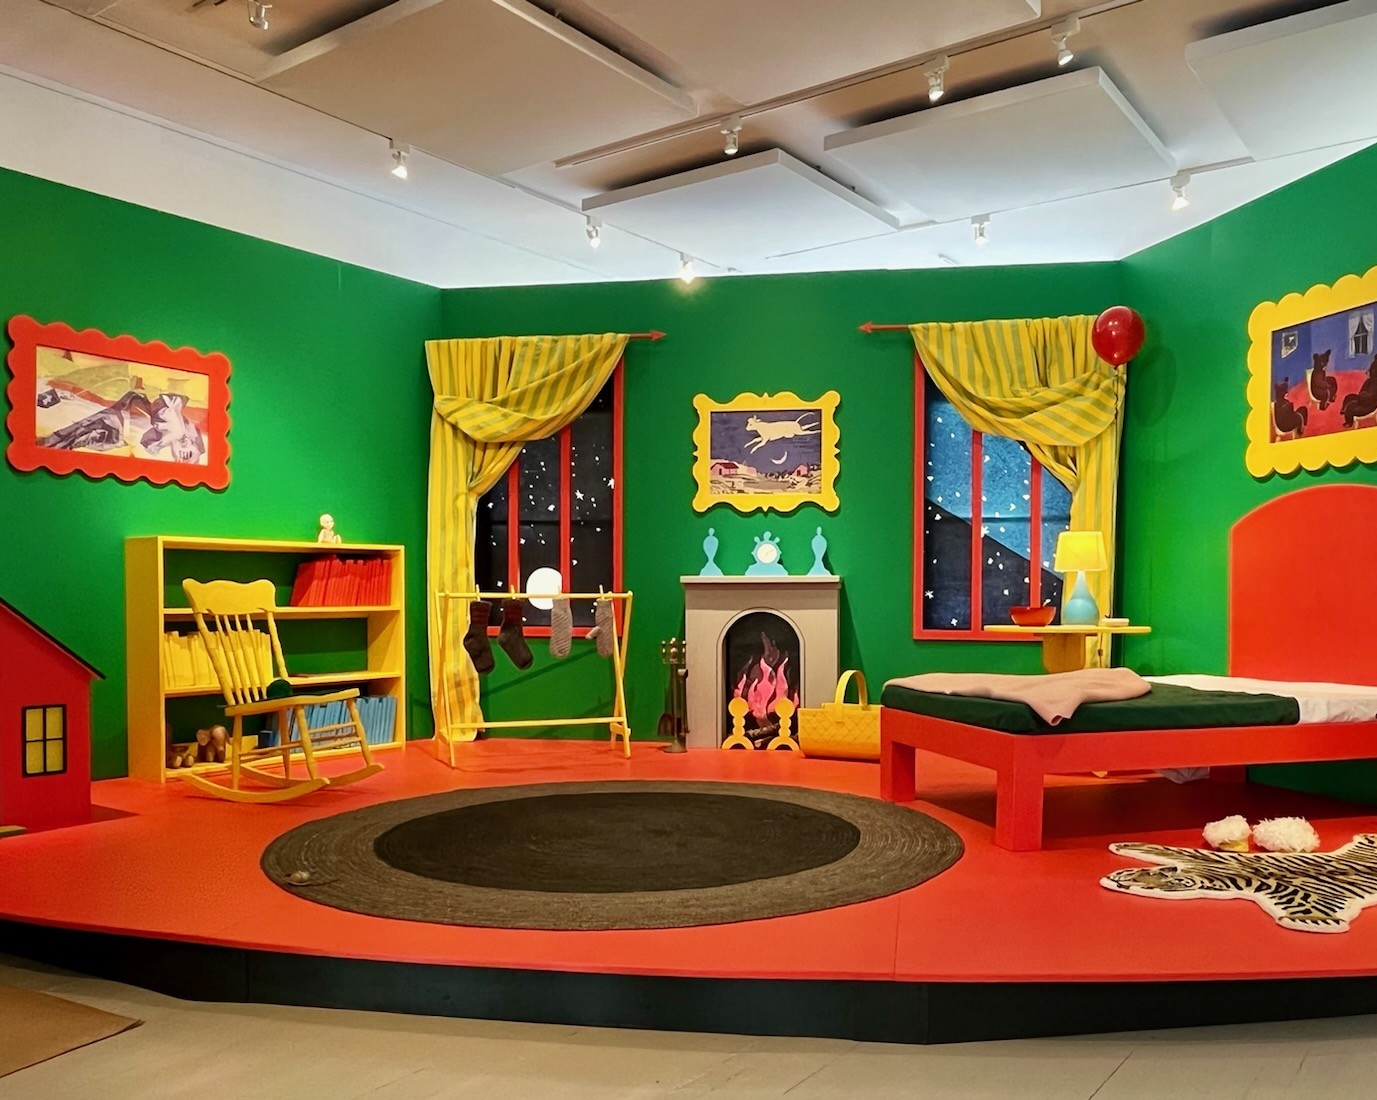 Concordia artist reimagines the classic children's book Goodnight Moon for a gallery space